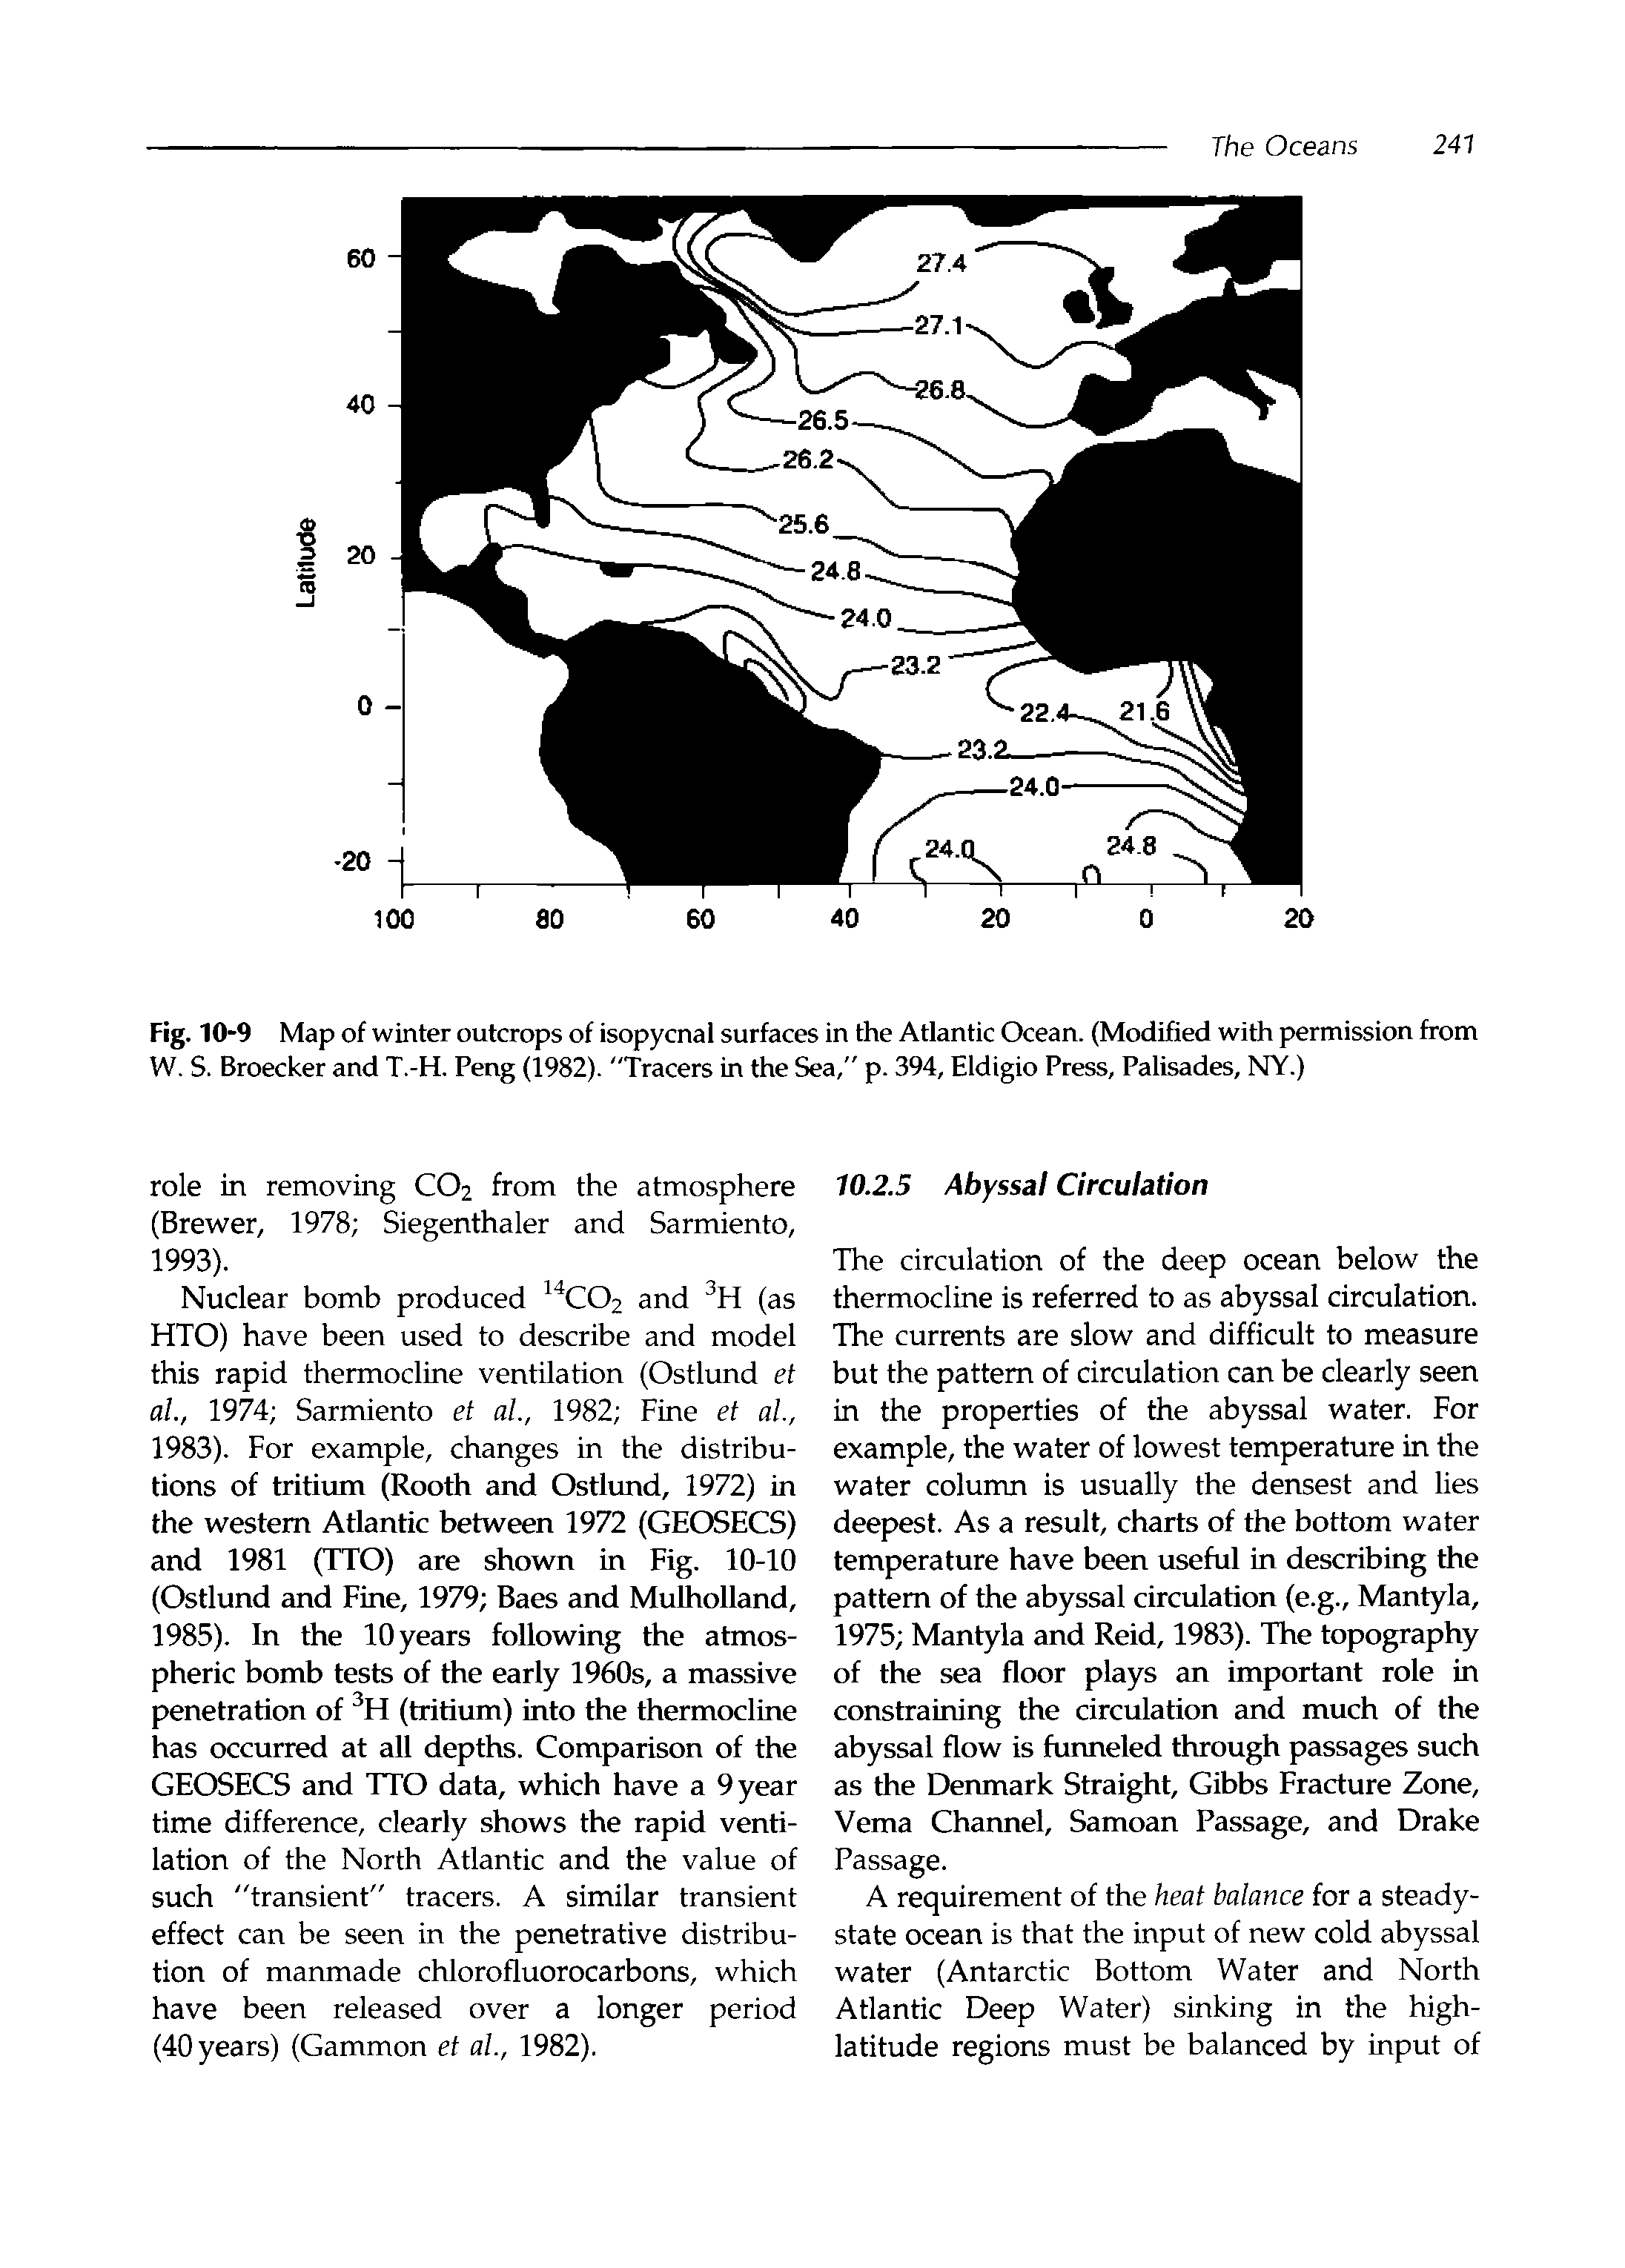 Fig. 10-9 Map of winter outcrops of isopycnal surfaces in the Atlantic Ocean. (Modified with permission from W. S. Broecker and T.-H. Peng (1982). Tracers in the Sea," p. 394, Eldigio Press, Palisades, NY.)...